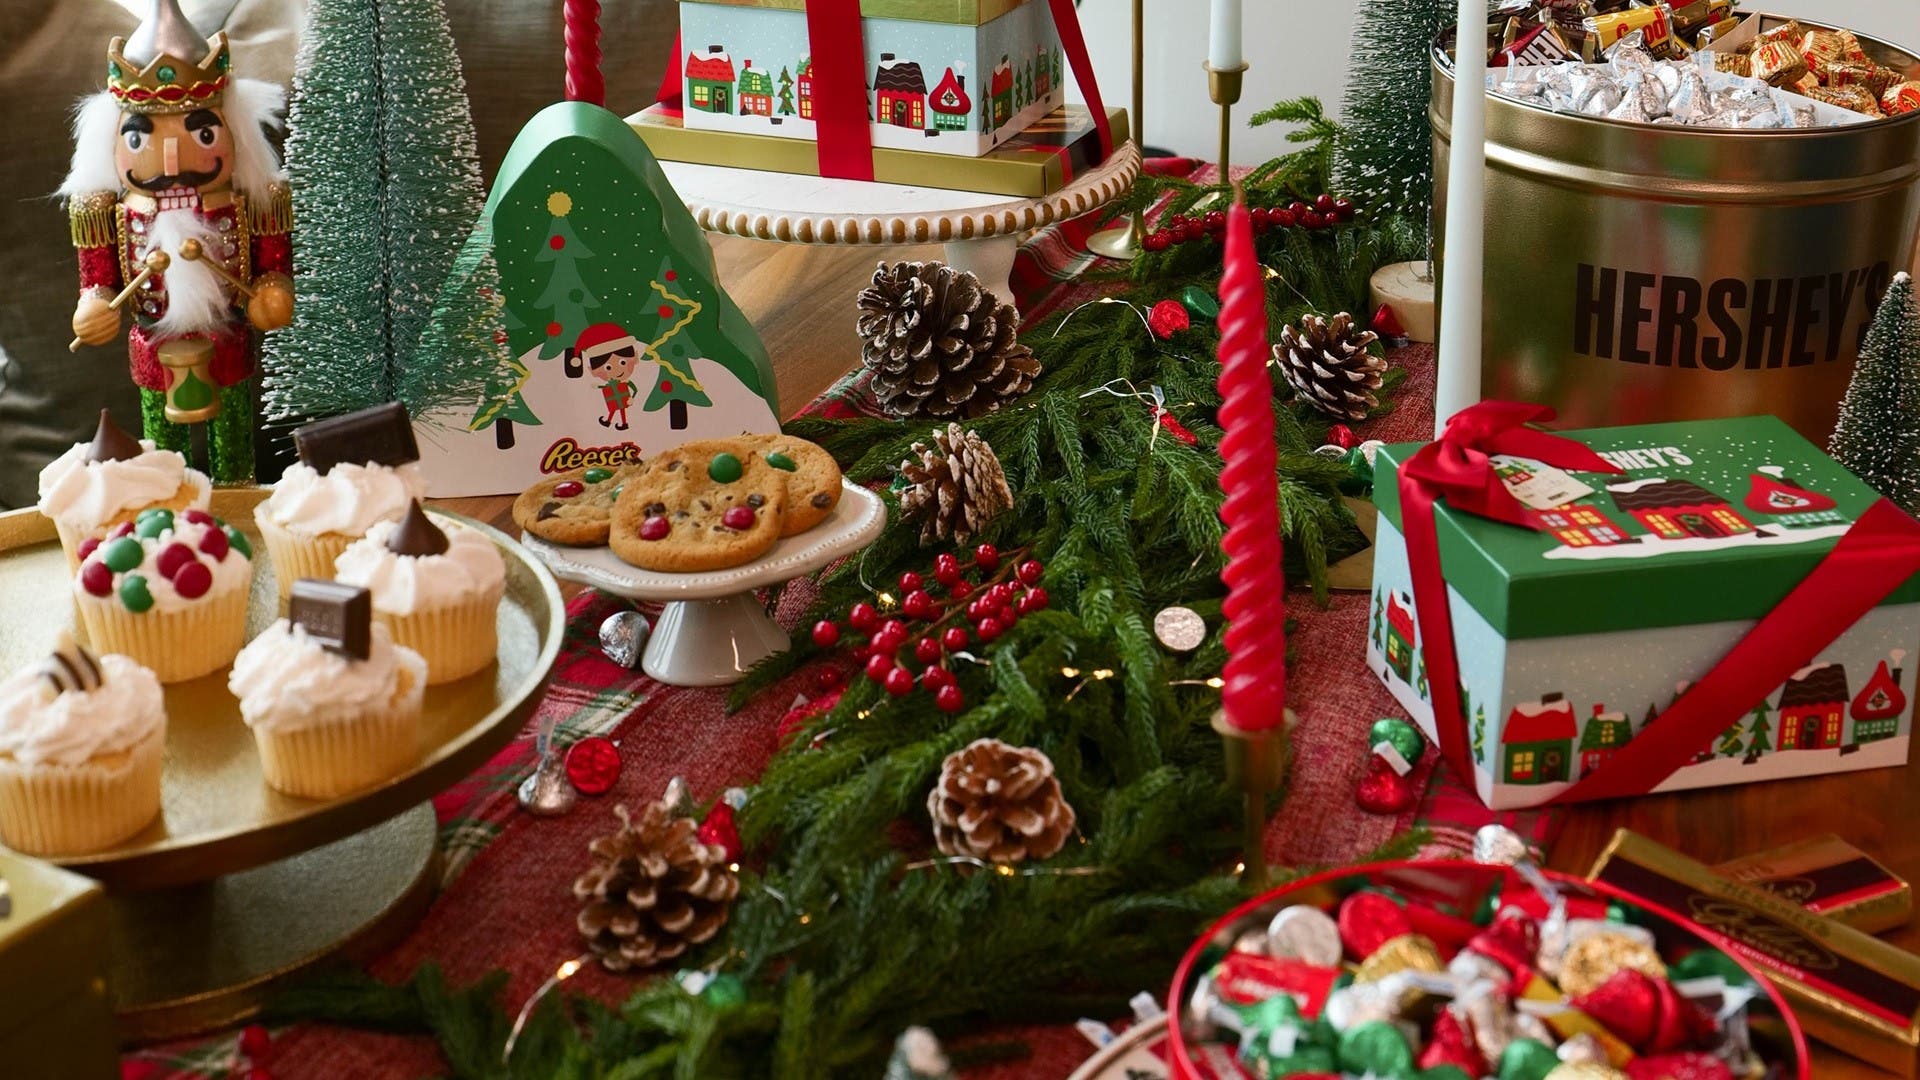 HERSHEY'S Holiday Tablescape